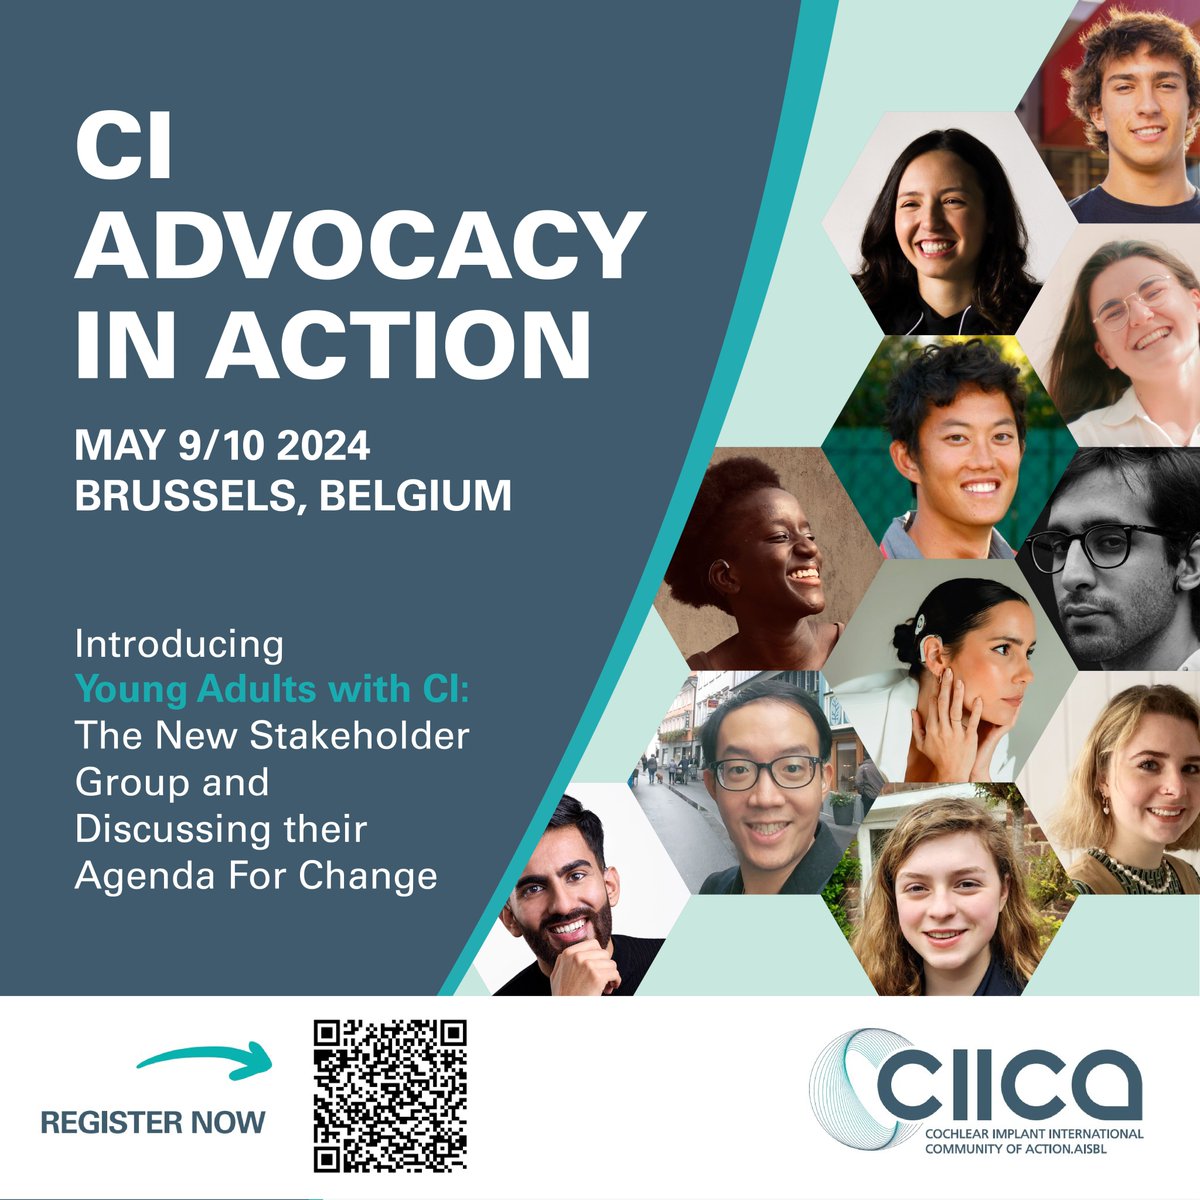 Exciting Announcement! Introducing Young Adults with CI: Our Dynamic New Stakeholder Group and Discussing their Agenda For Change! Discover more by reserving your spot at the upcoming CI Advocacy in Action in Brussels on May 9/10. ciicanet.org/events/ci-advo… #CIAdvocacyInAction